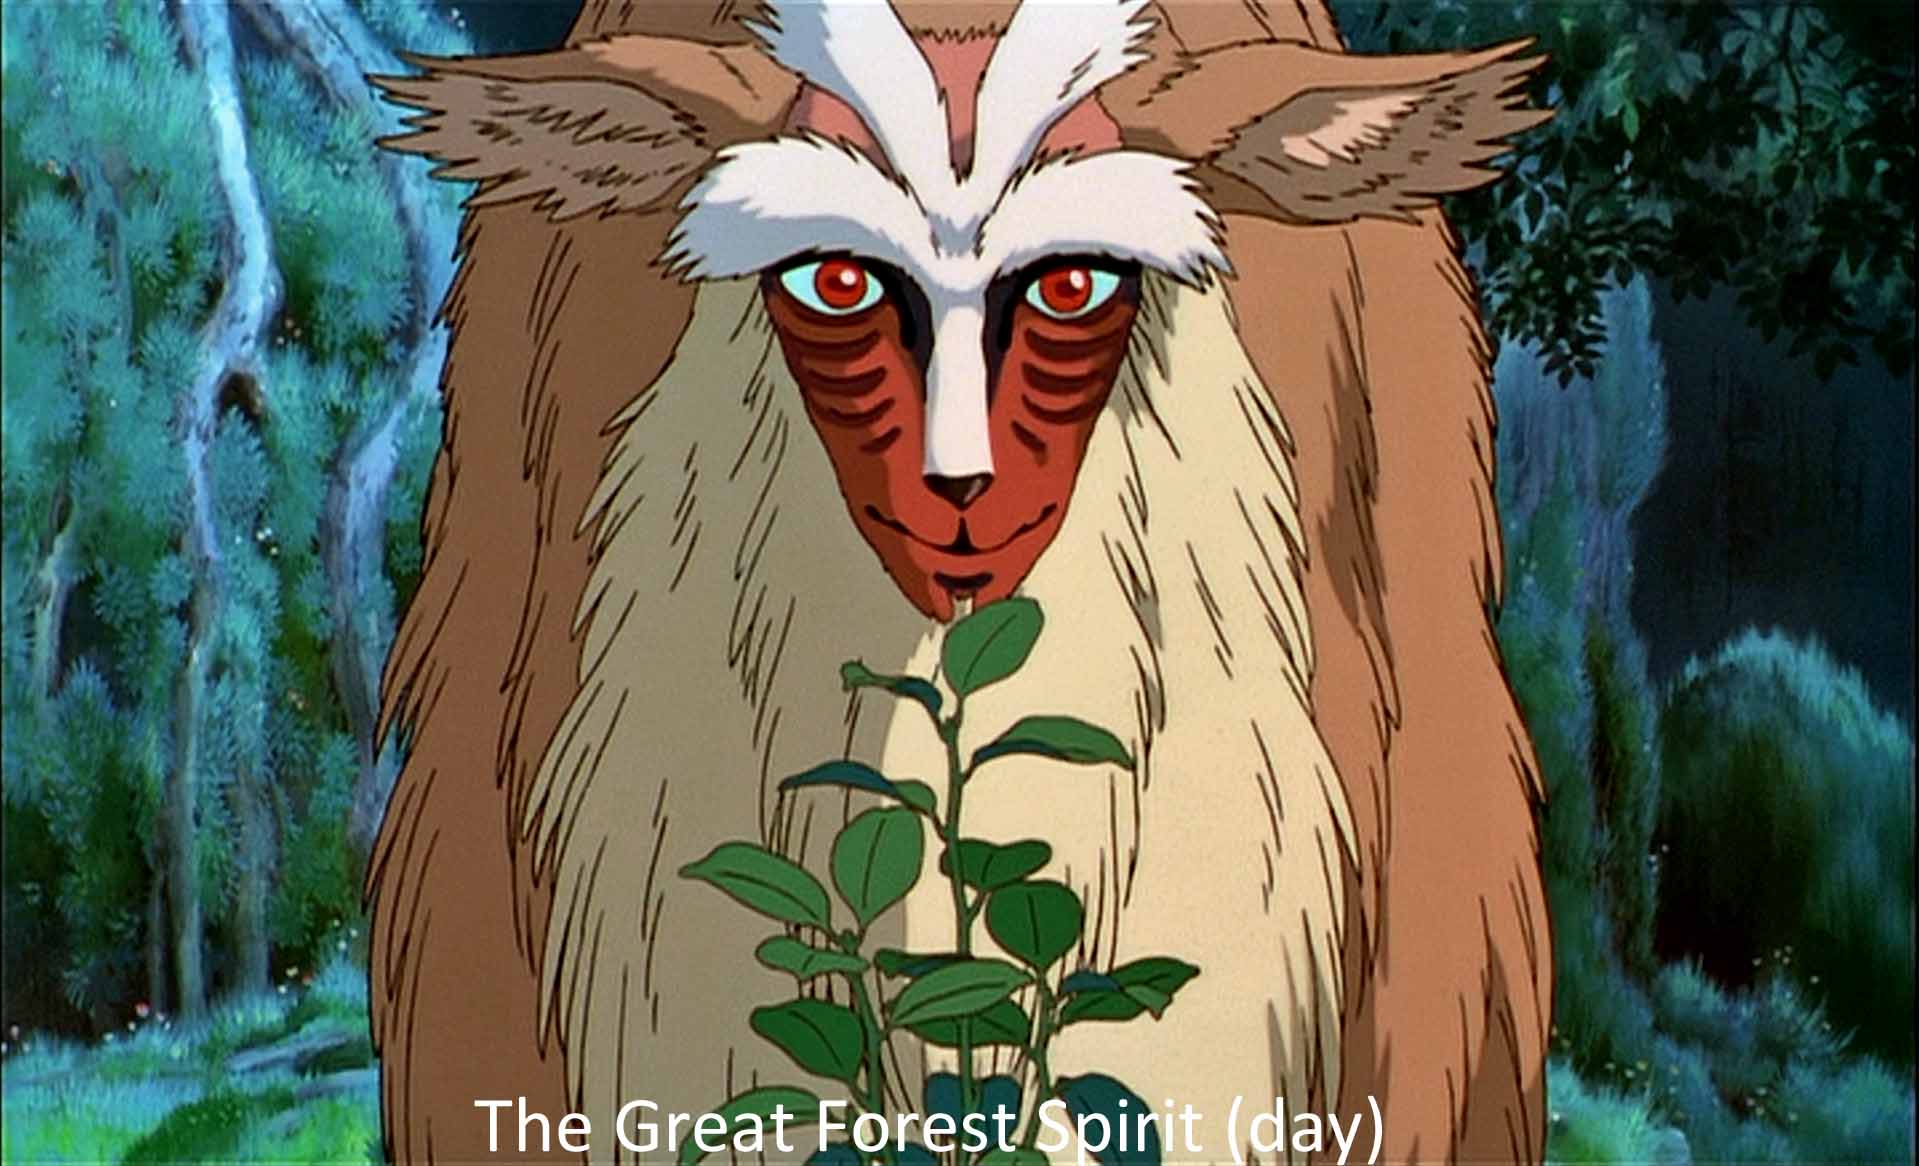 The Great Forest Spirit (day)